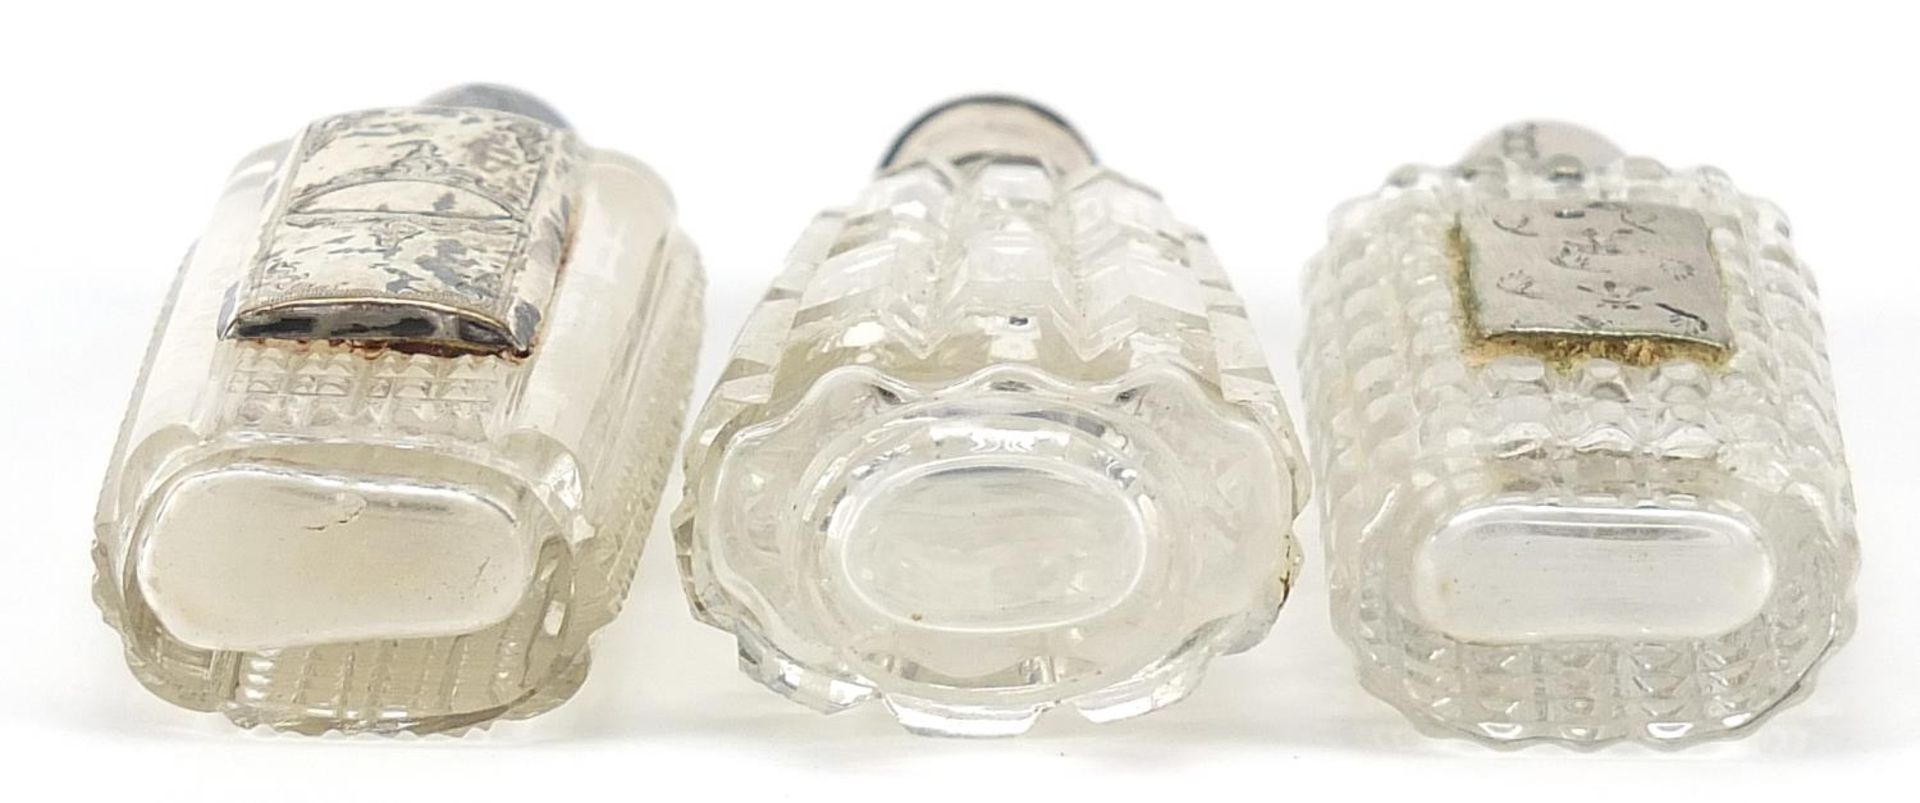 Three Dutch silver mounted cut glass scent bottles, the largest 9.5cm high - Image 3 of 3